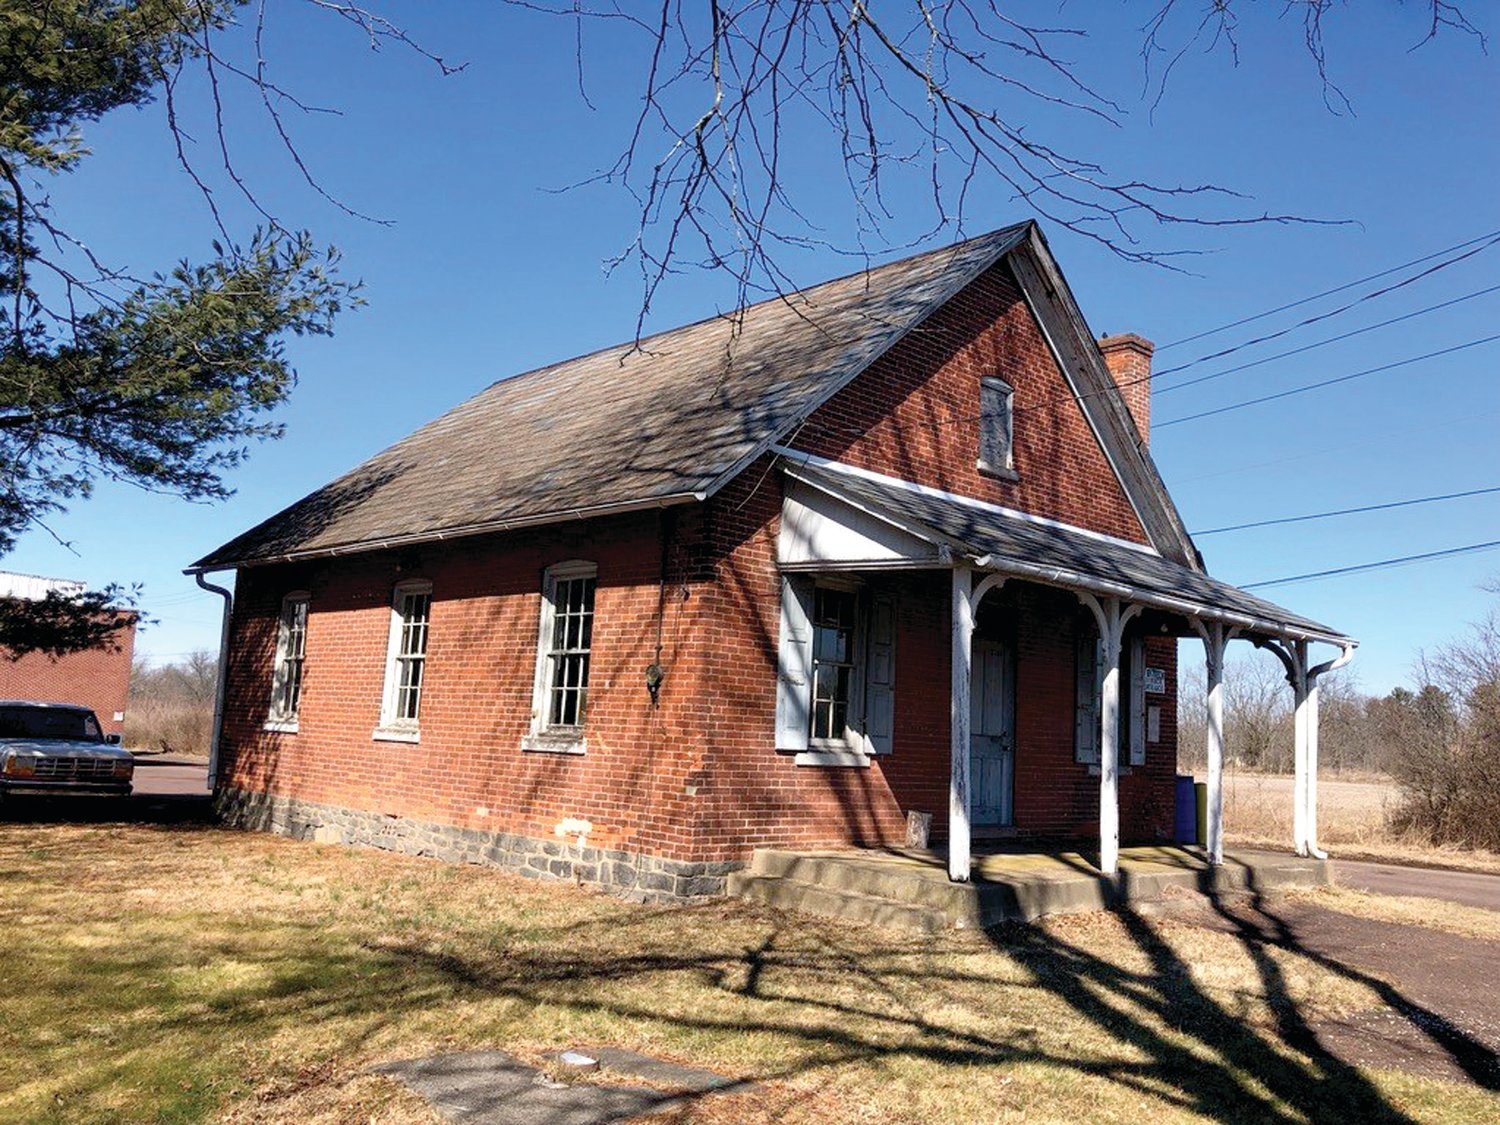 The Richland Township Preservation Board wants to halt deterioration of the historic Central School through a laundry list of repairs that could precede a full-scale restoration project.